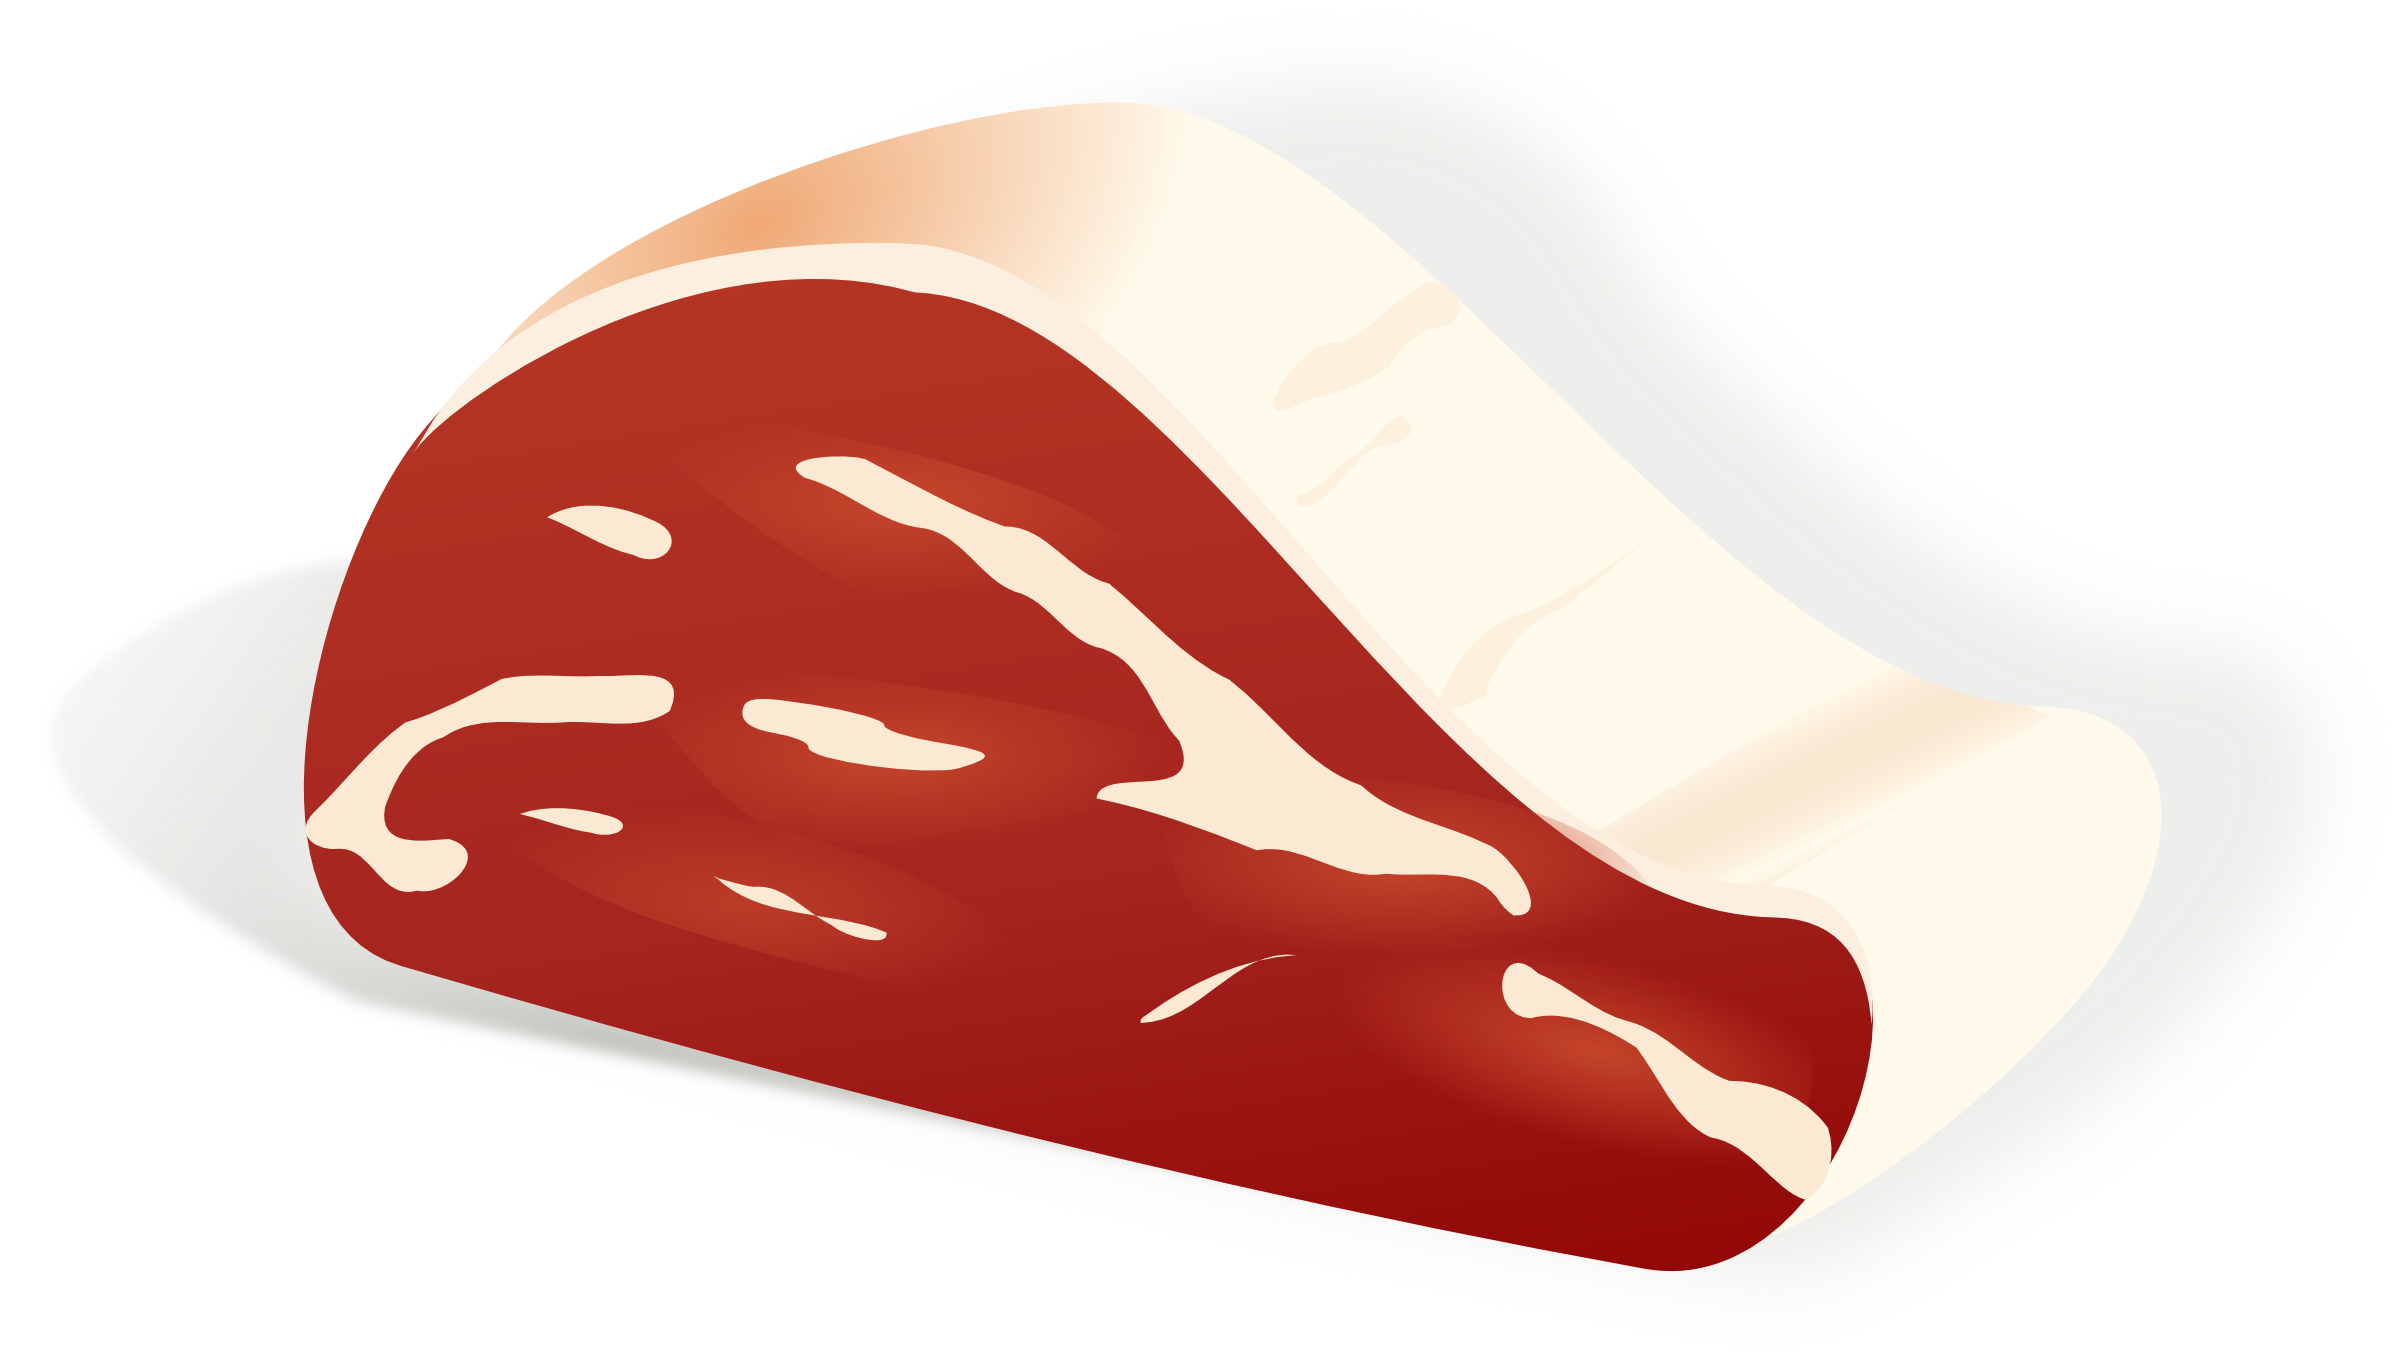 Meat clipart beef. Free panda images meatclipart